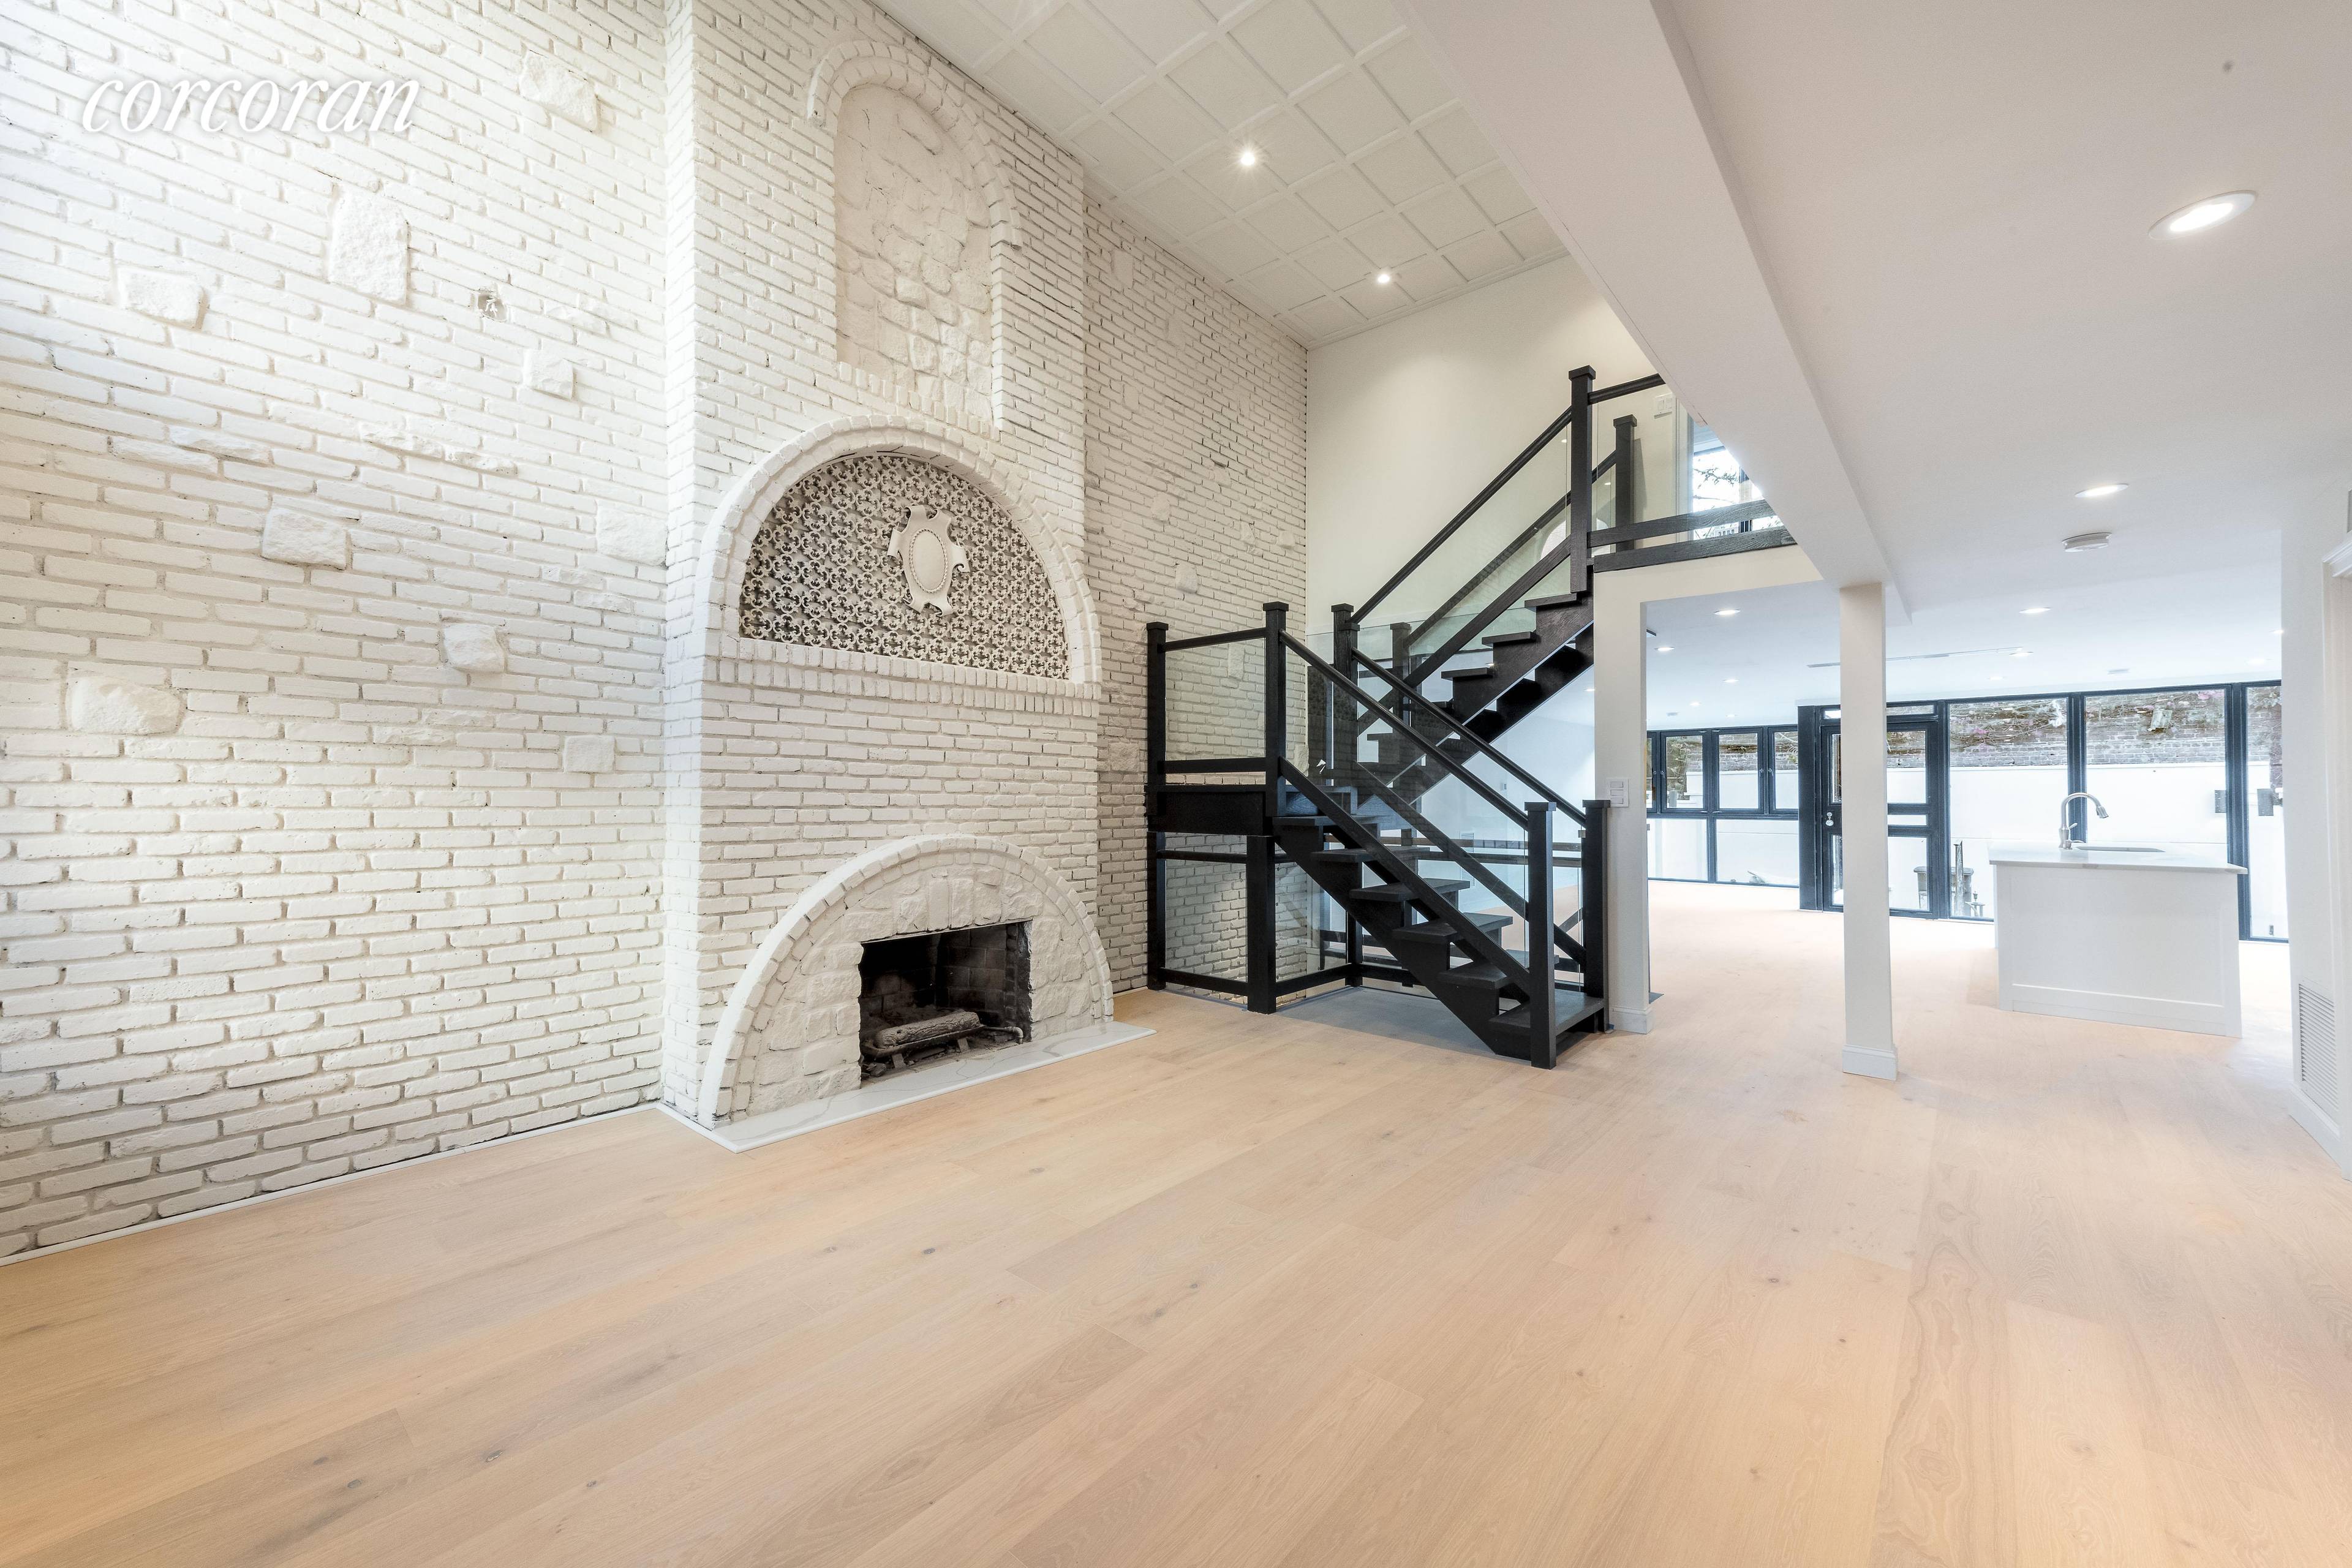 Ultra Rare, 25A wide, 4 story completely re built and re imagined single family townhouse on an incredible block of Gowanus.